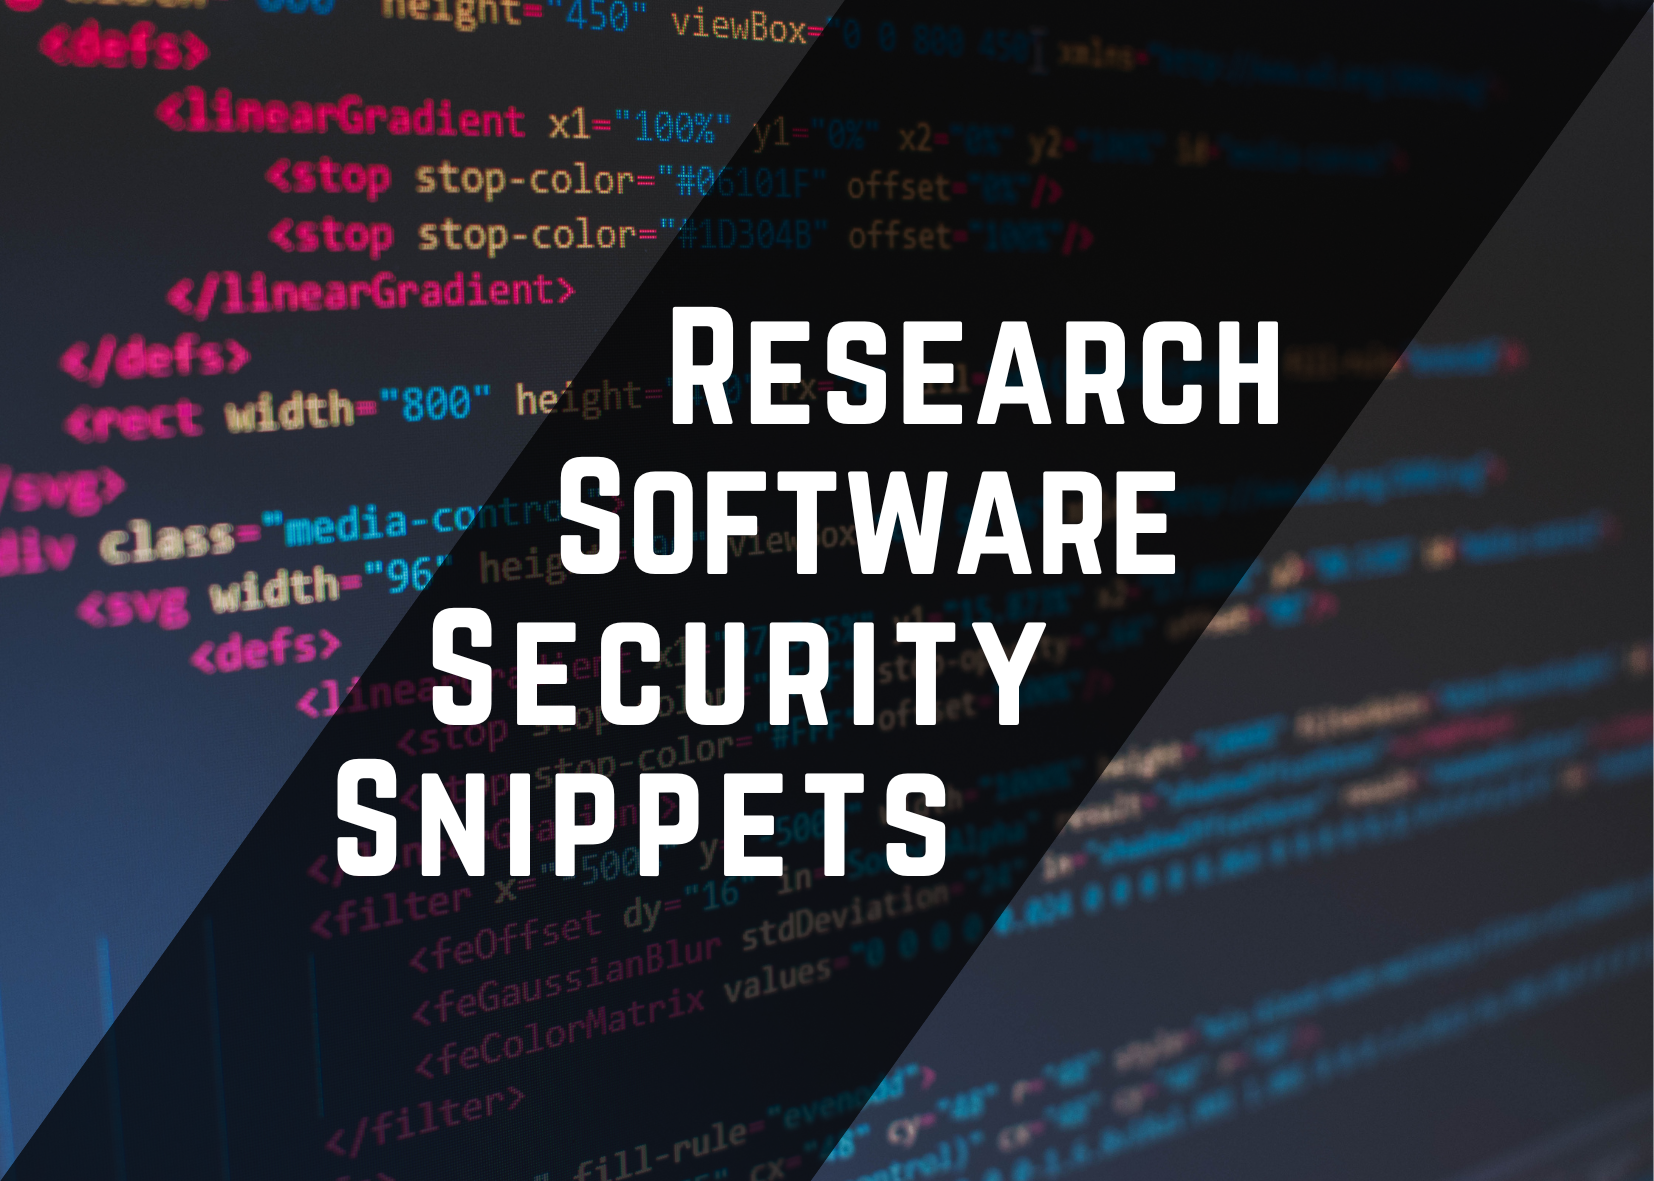 research software security snippets written in white on the dark background of a laptop with code on it